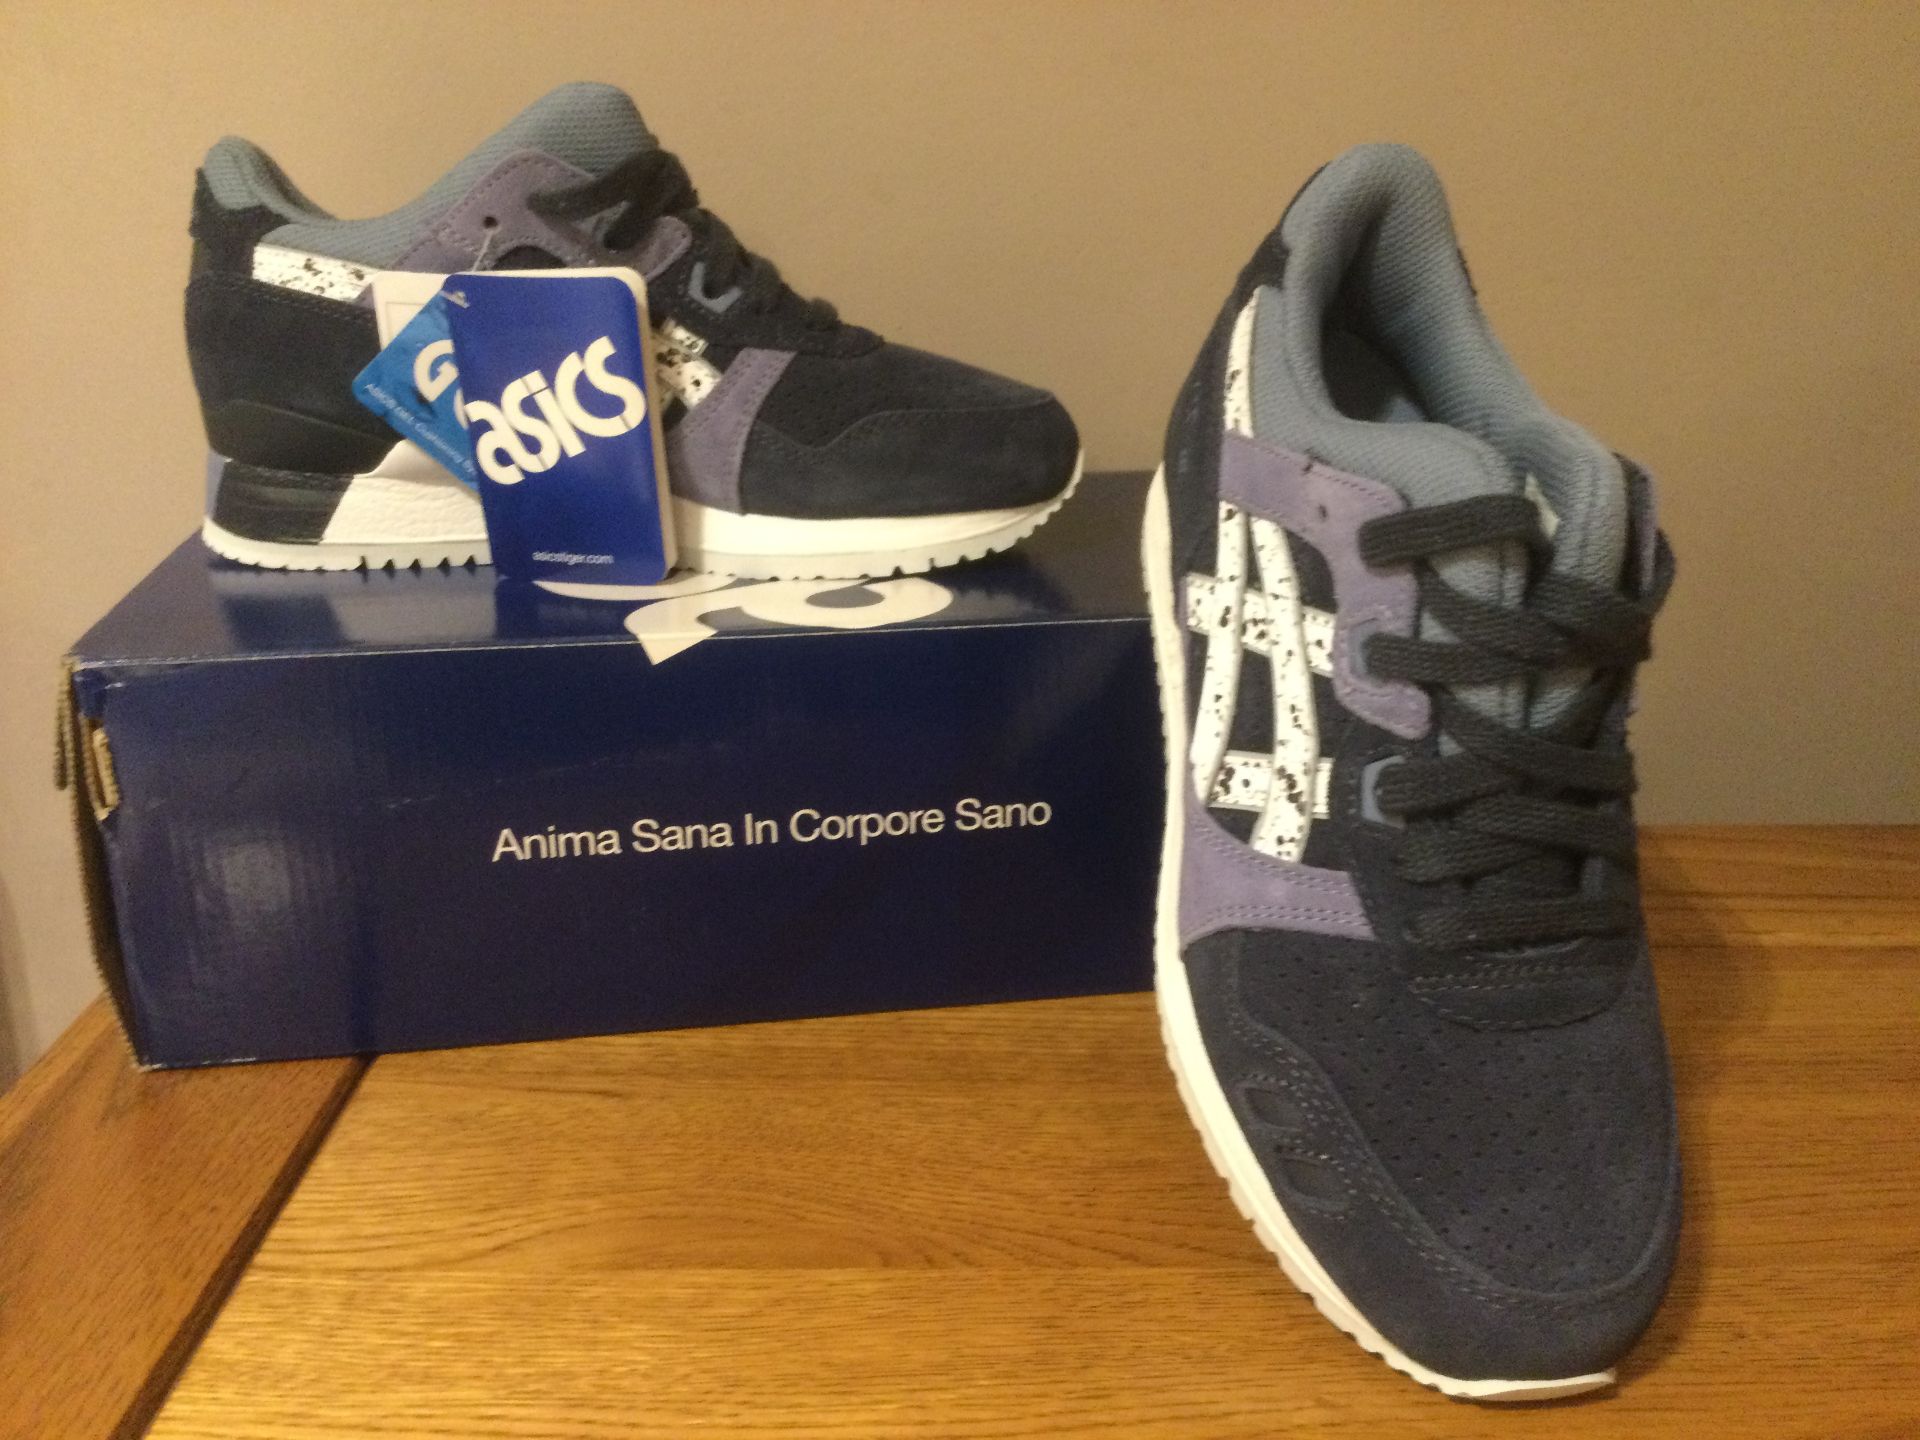 ASICS Gel-Lyte III, Ladies Trainers, Indian Ink, Size 3 - New RRP £95.00 - Image 2 of 7